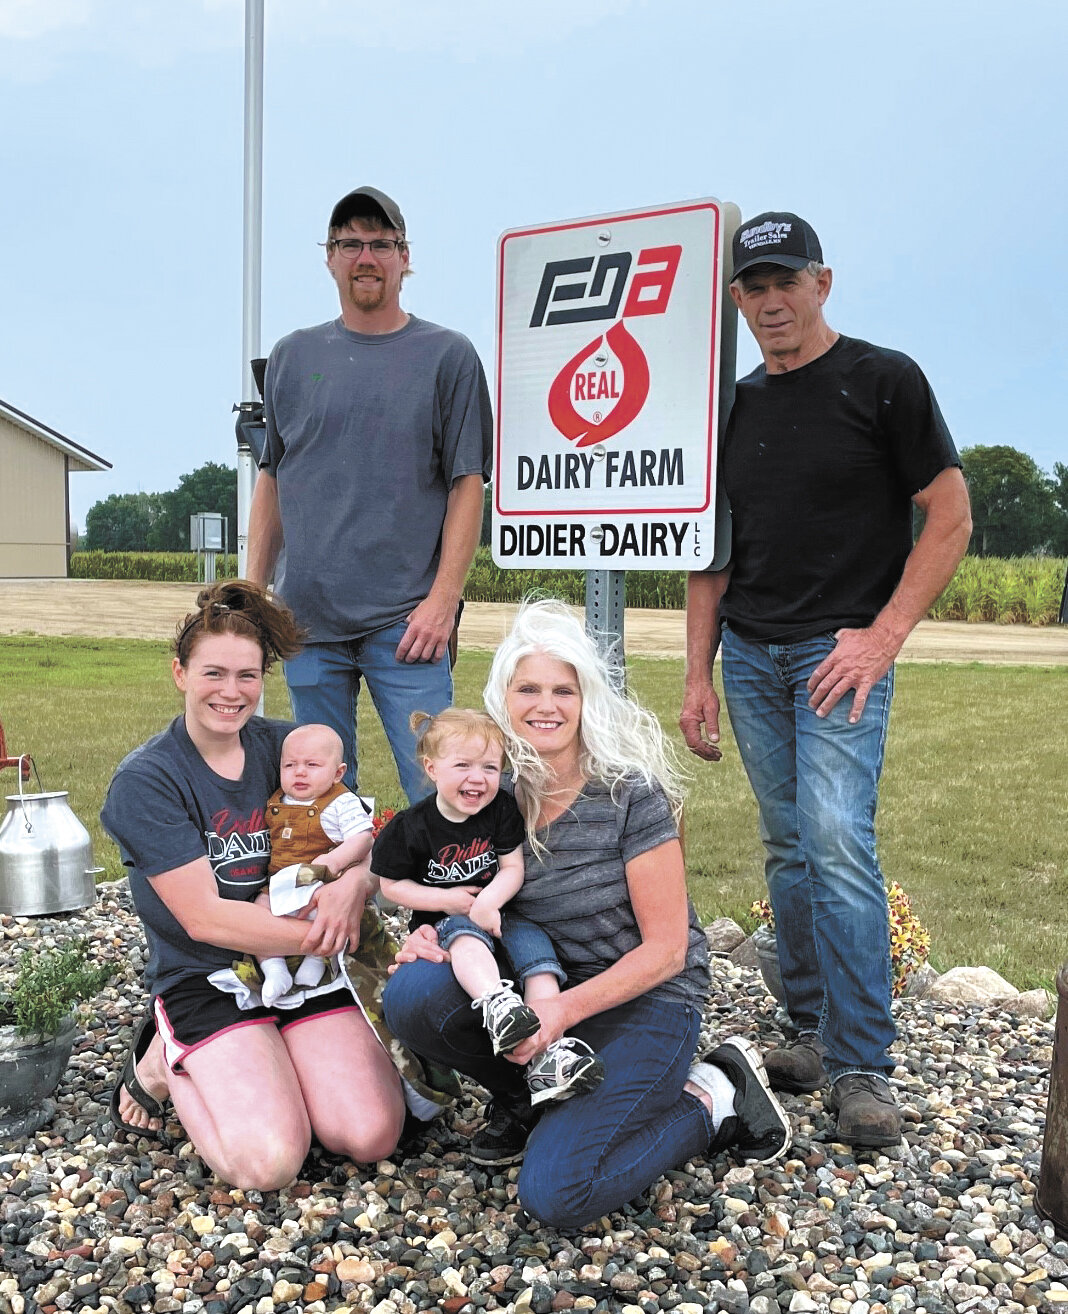 Kayla Bromenshenkel (front, from left), holding Boone Bromenshenkel, and Sharon Didier, holding Keeva Bromenshenkel; (back, from left) Nick Didier and Gerryl “Fritz” Didier stand together on their farm near Osakis, Minnesota. The Didiers milk 120 cows with a robotic milking system.